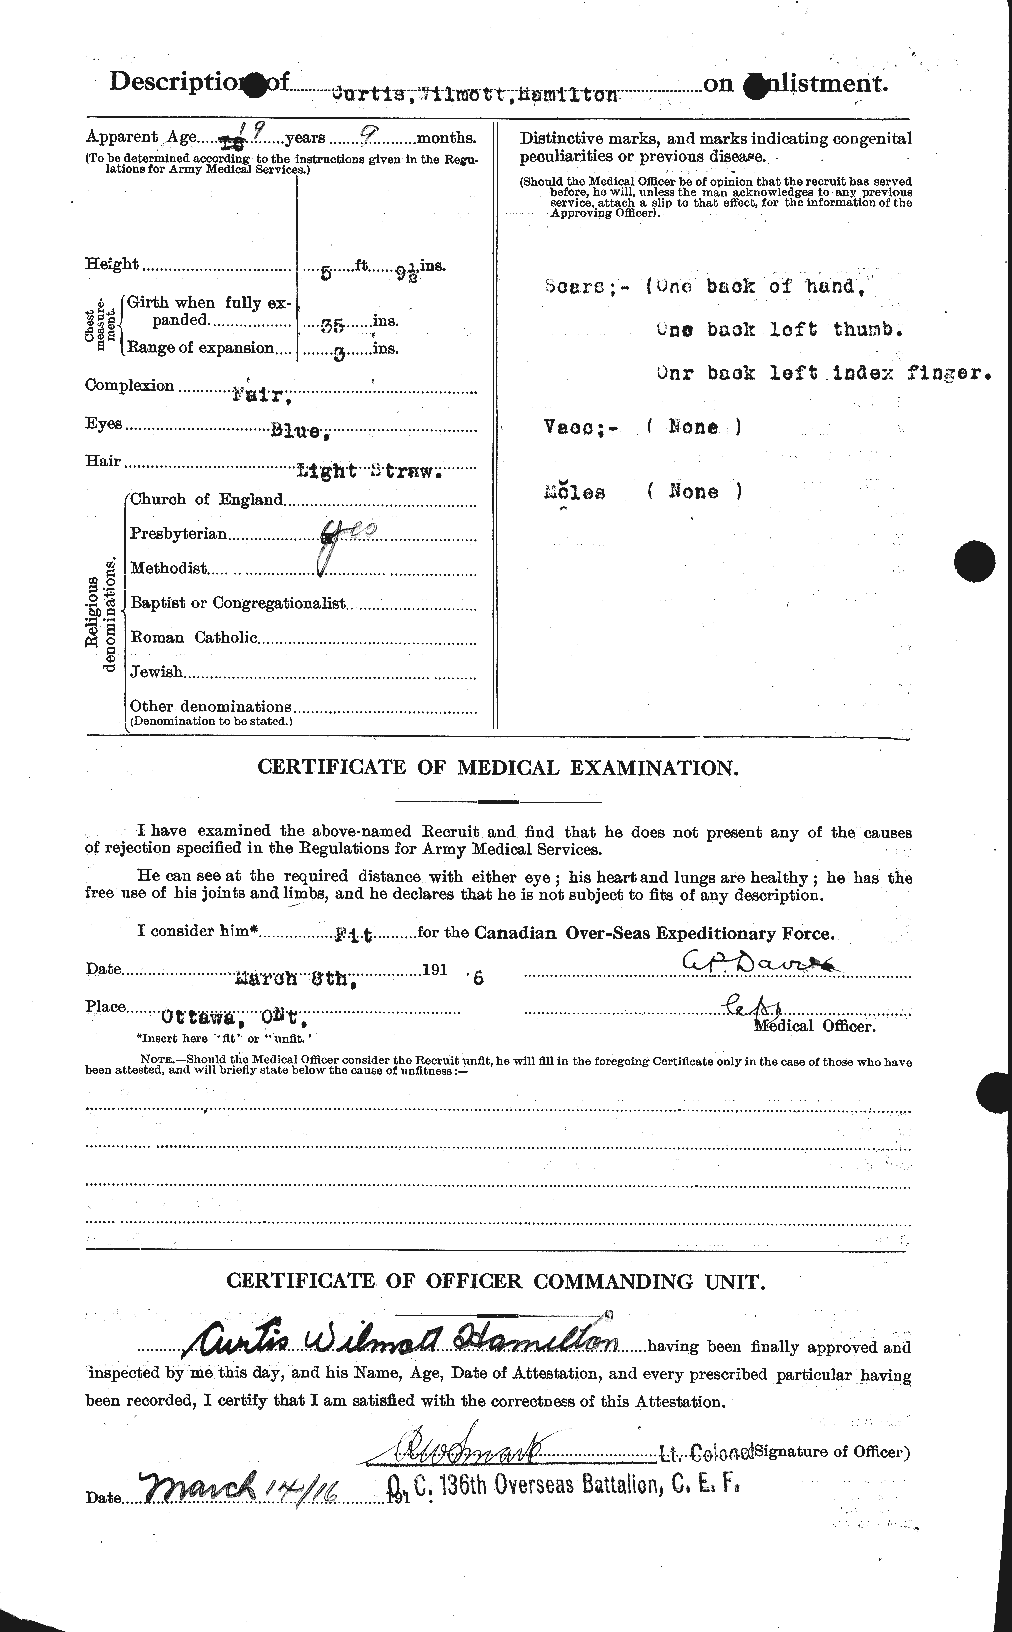 Personnel Records of the First World War - CEF 375331b